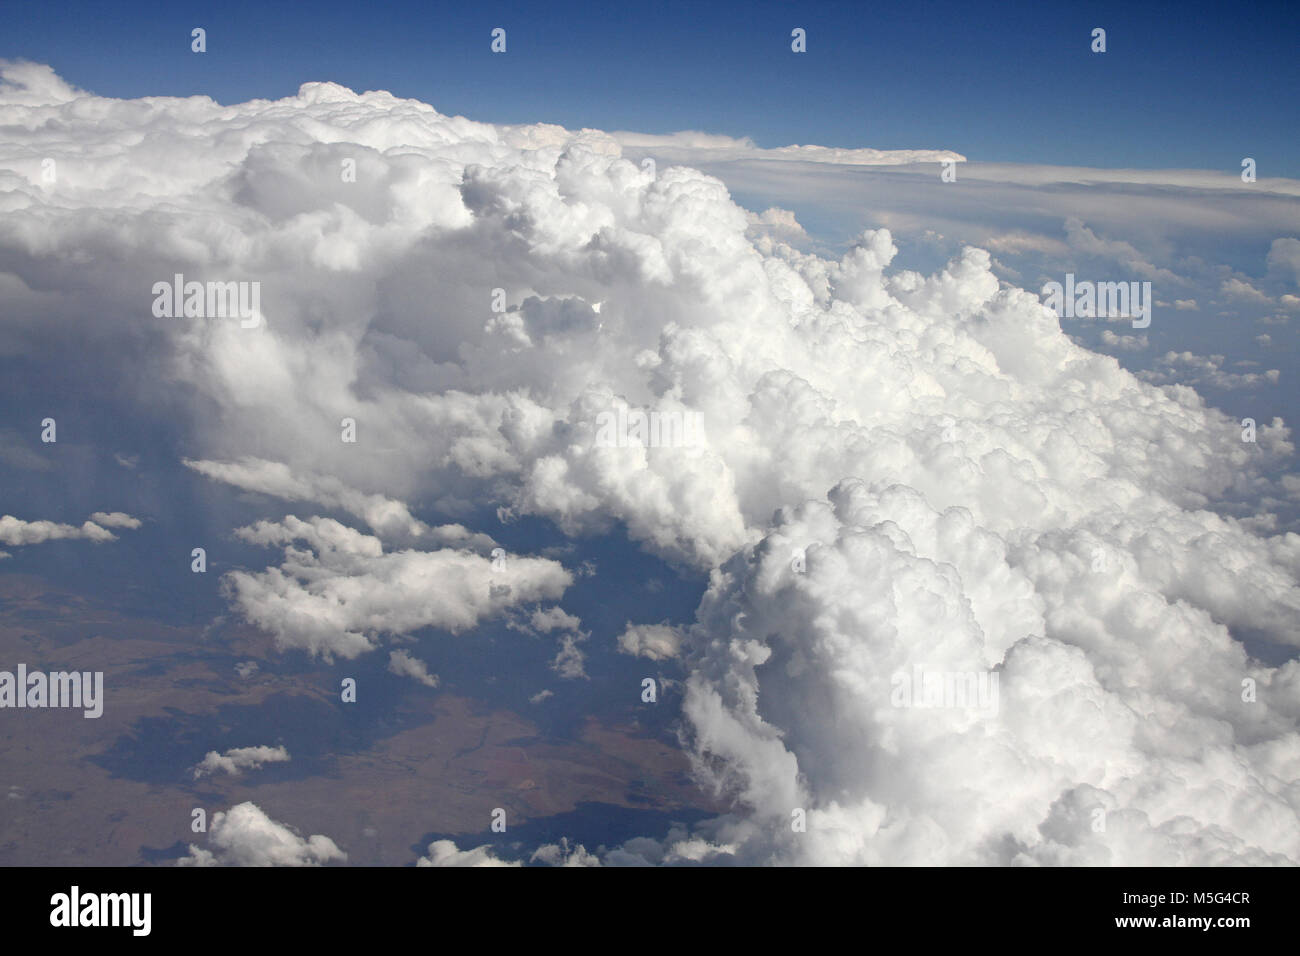 View of clouds from a airplane, Africa Stock Photo